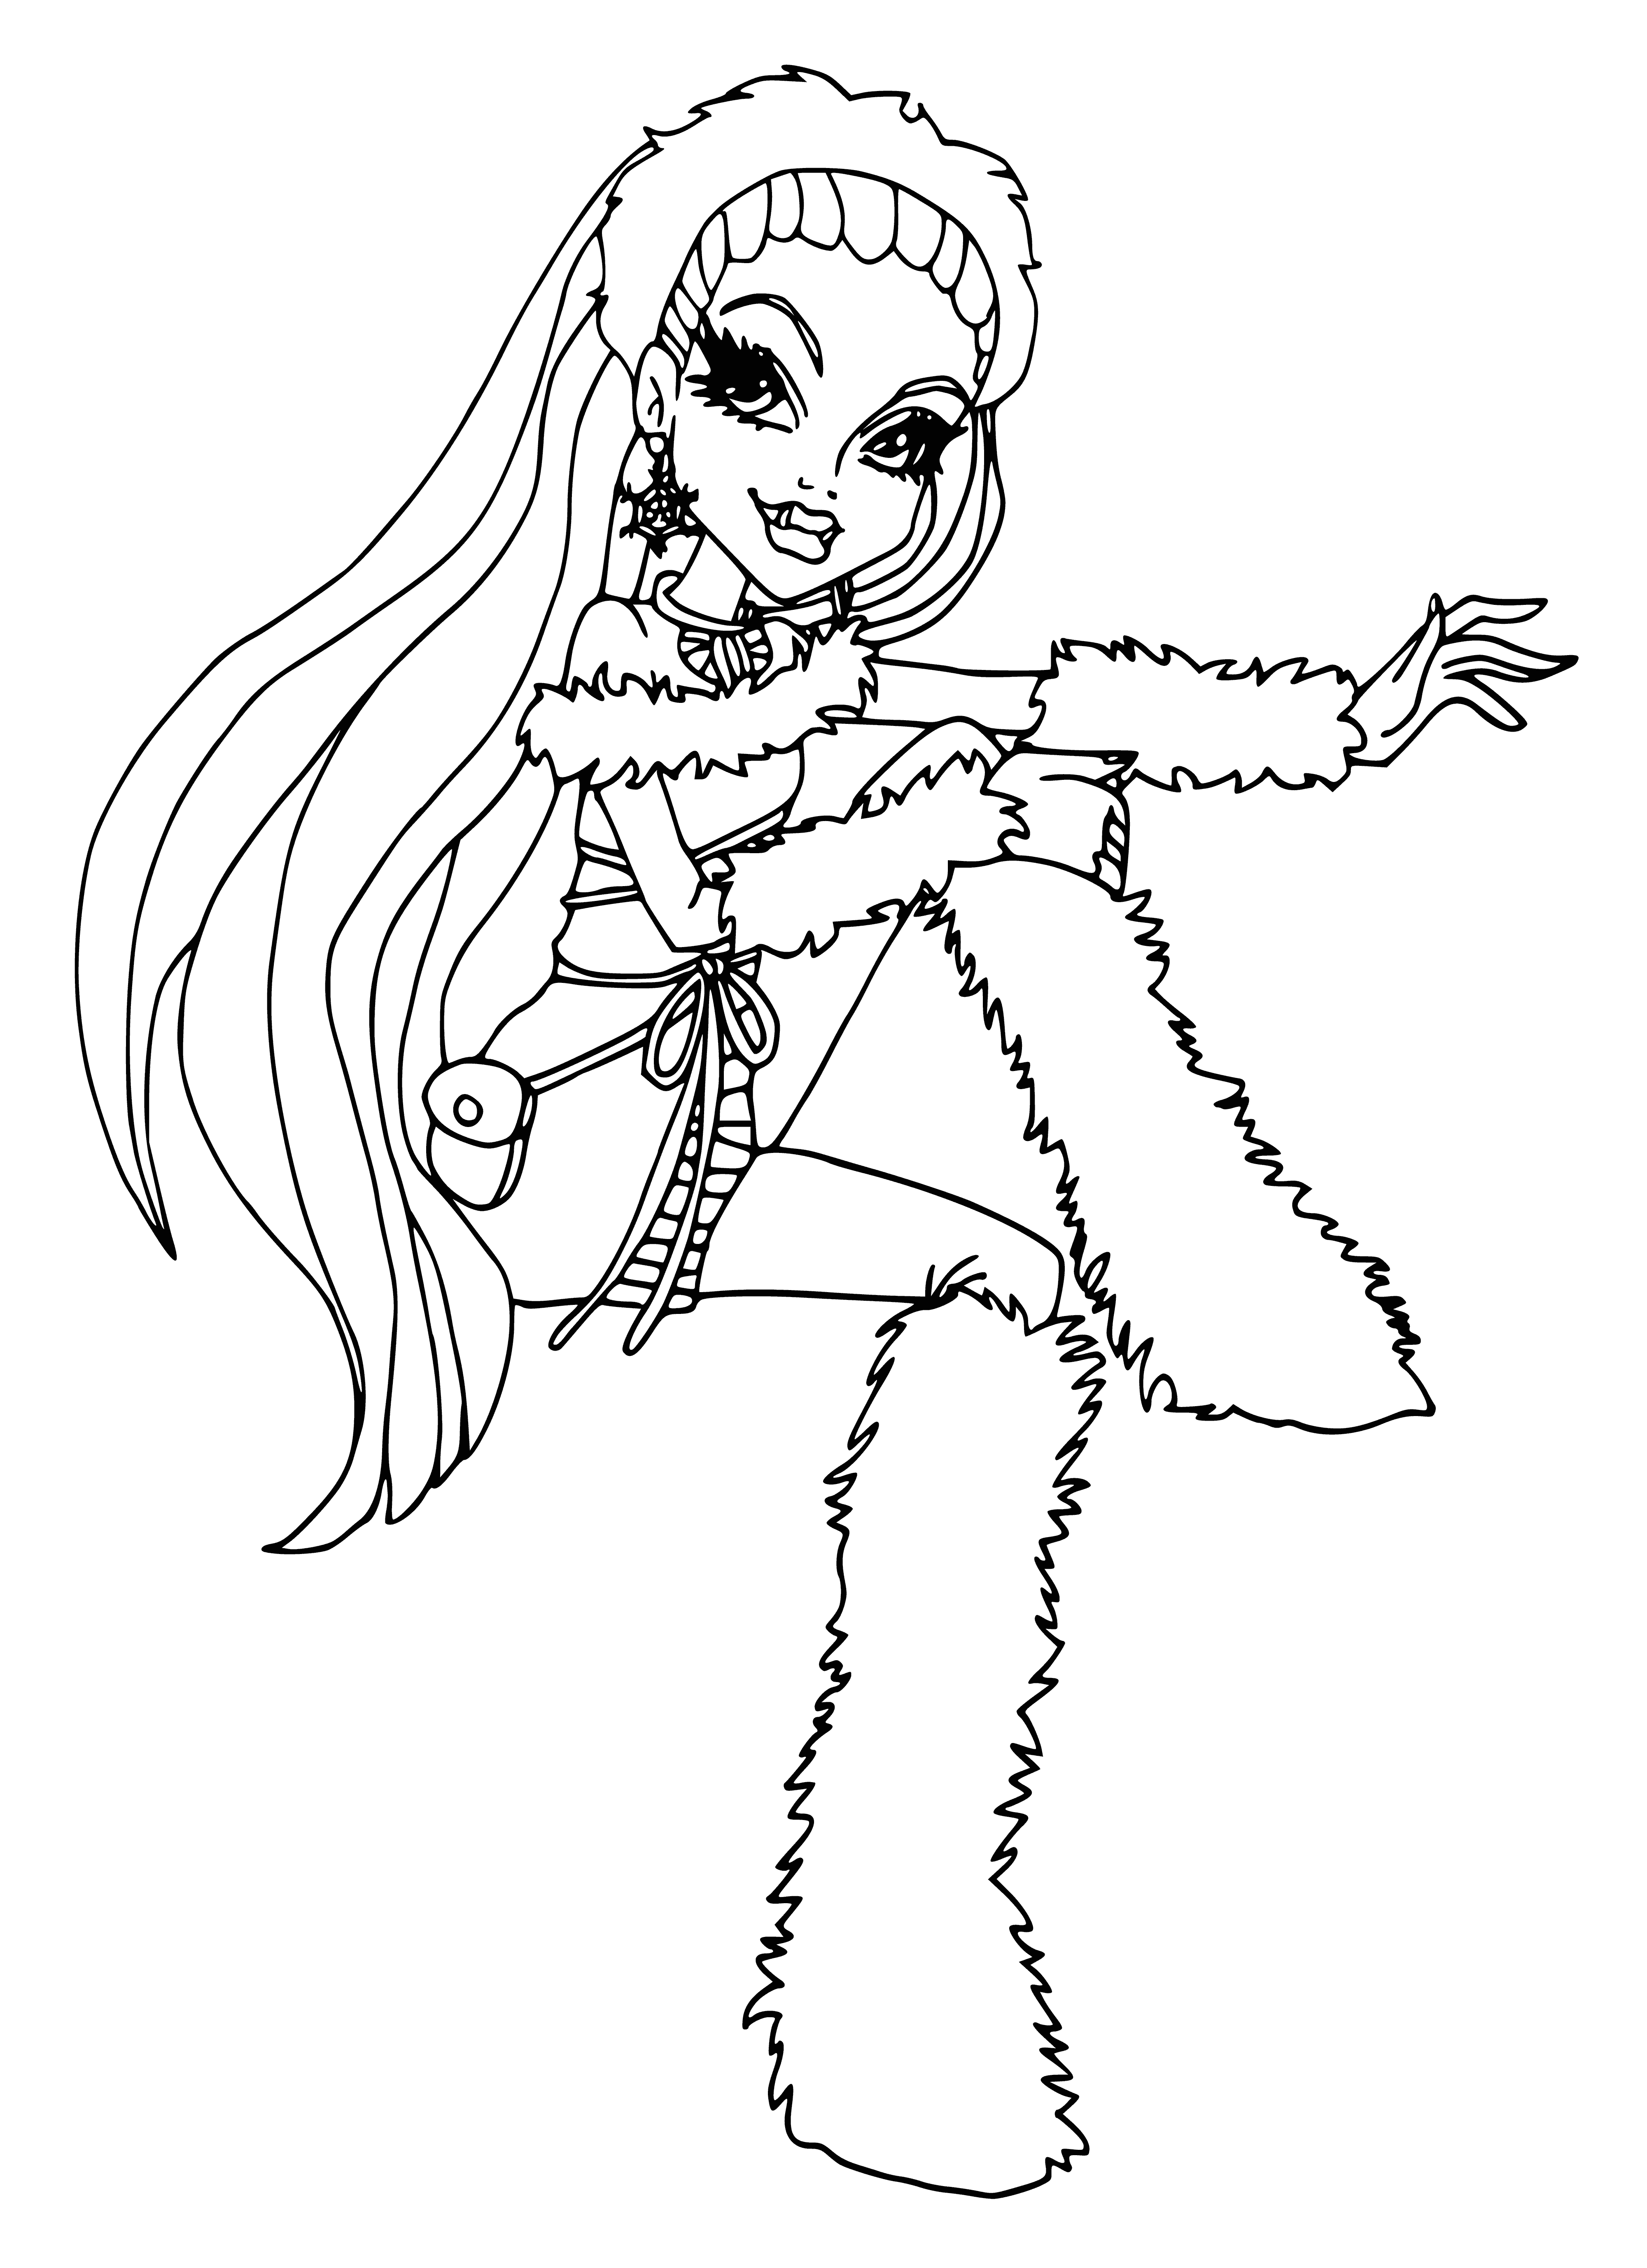 coloring page: Abby Bominable is a fifteen-year-old yeti's daughter and Monster High sophomore w/ white fur, blue eyes, and pink headband. She's a sergeant in Yetis softball team.